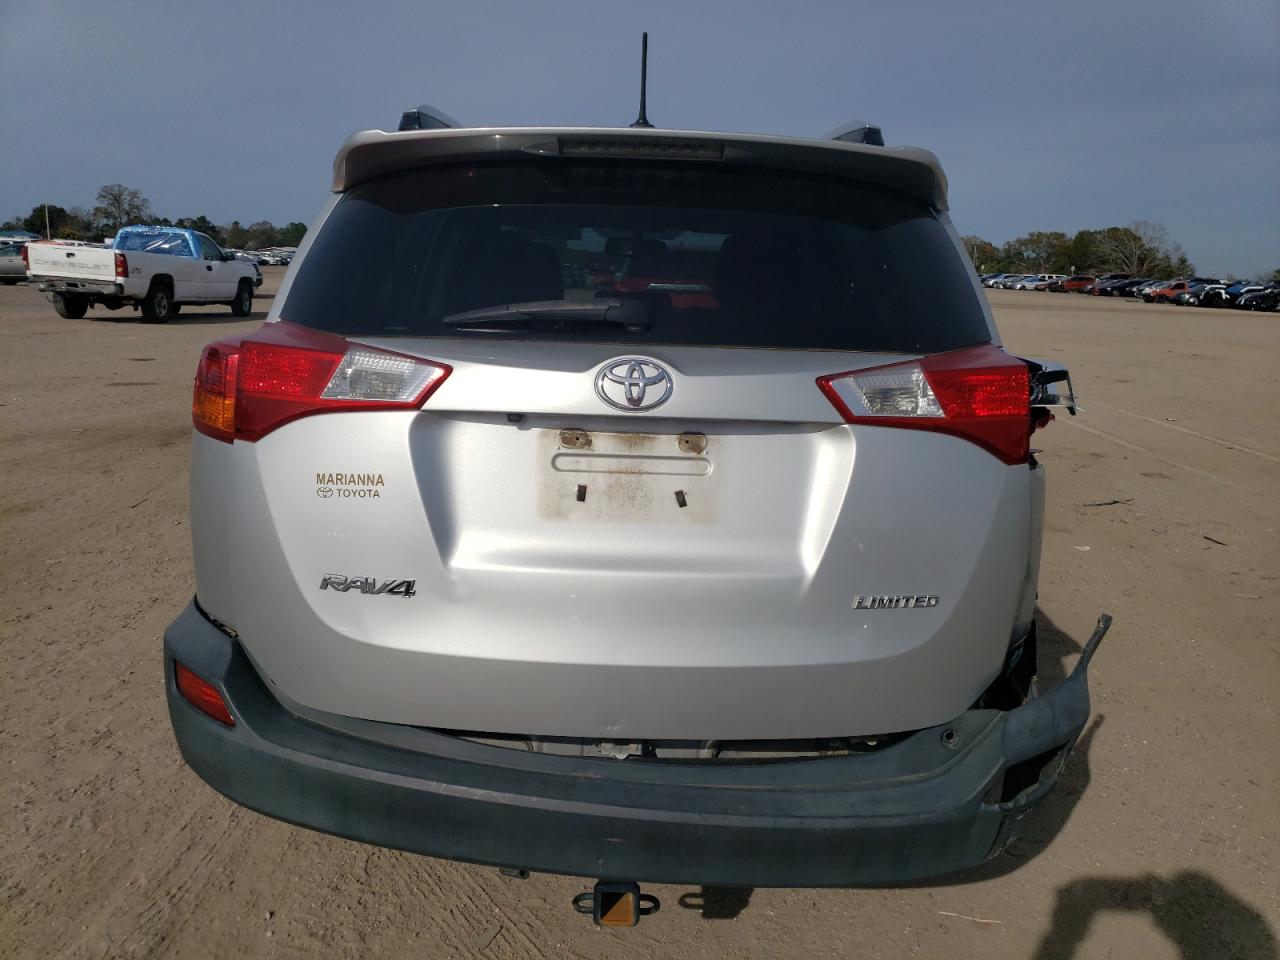 2T3YFREV1DW****** Salvage and Repairable 2013 Toyota RAV4 in Alabama State